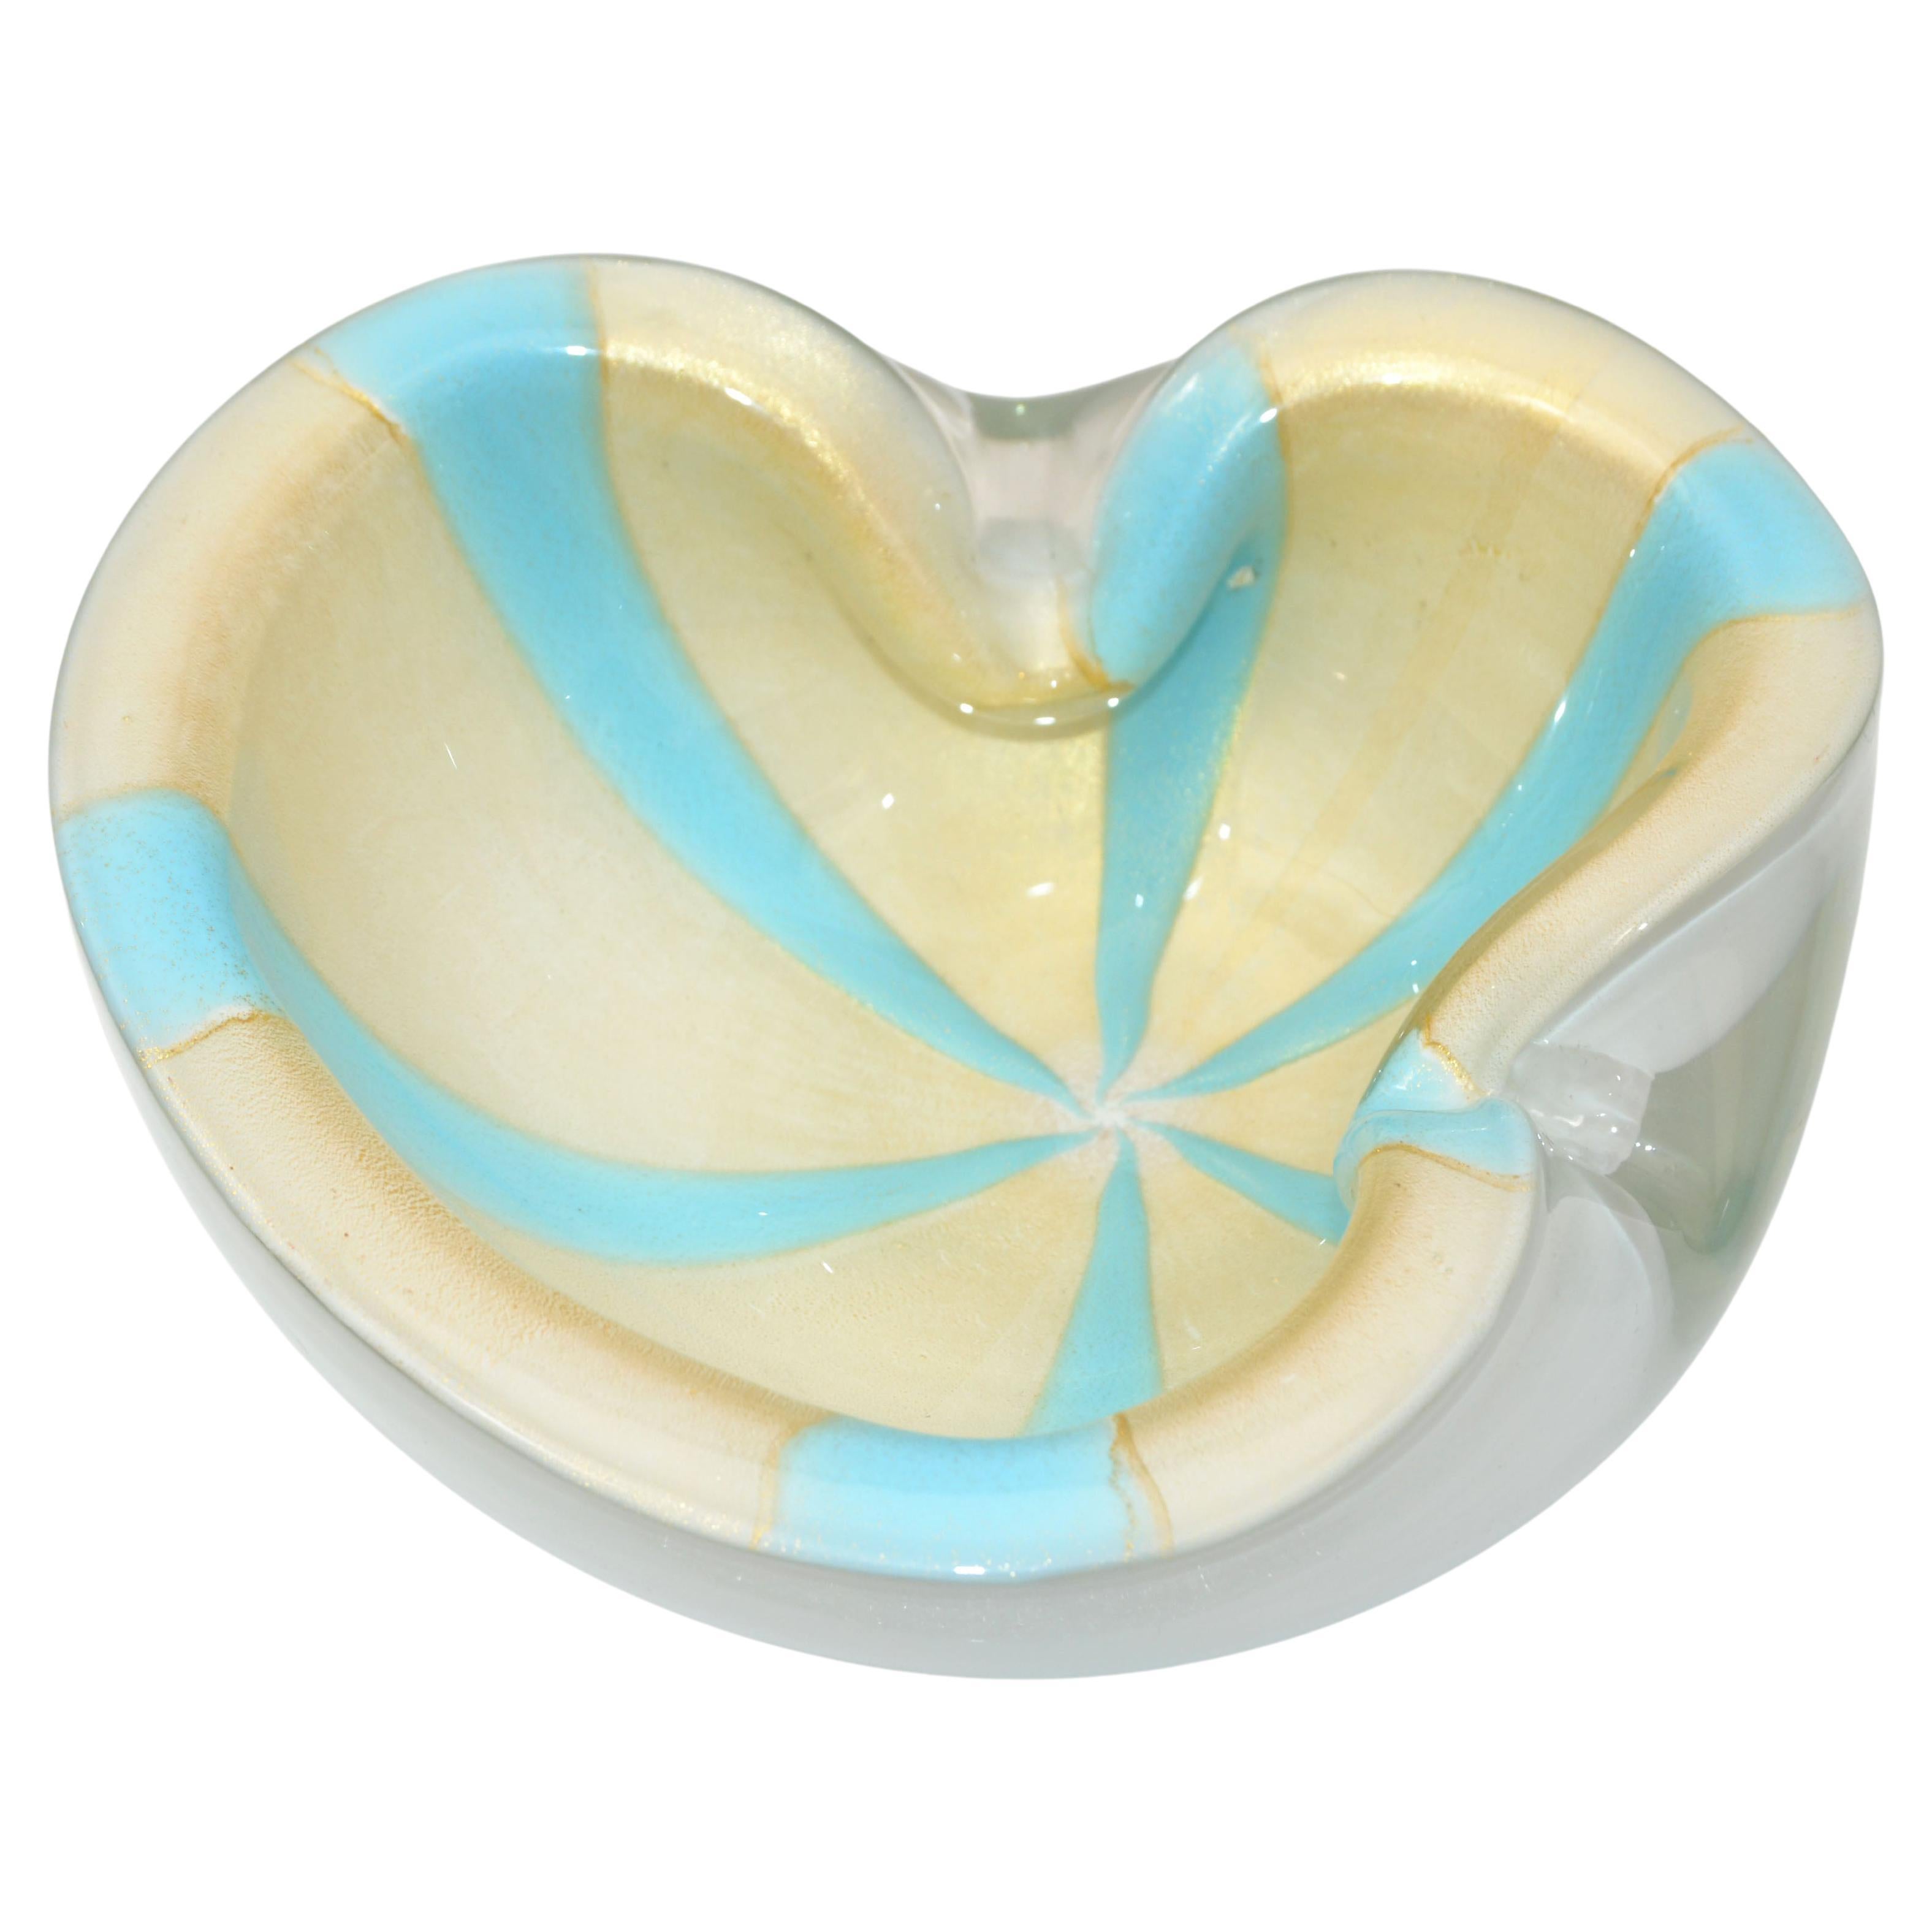 Murano Flavio Poli Triple Cased White, Turquoise & Gold Dust Glass Bowl, Italy For Sale